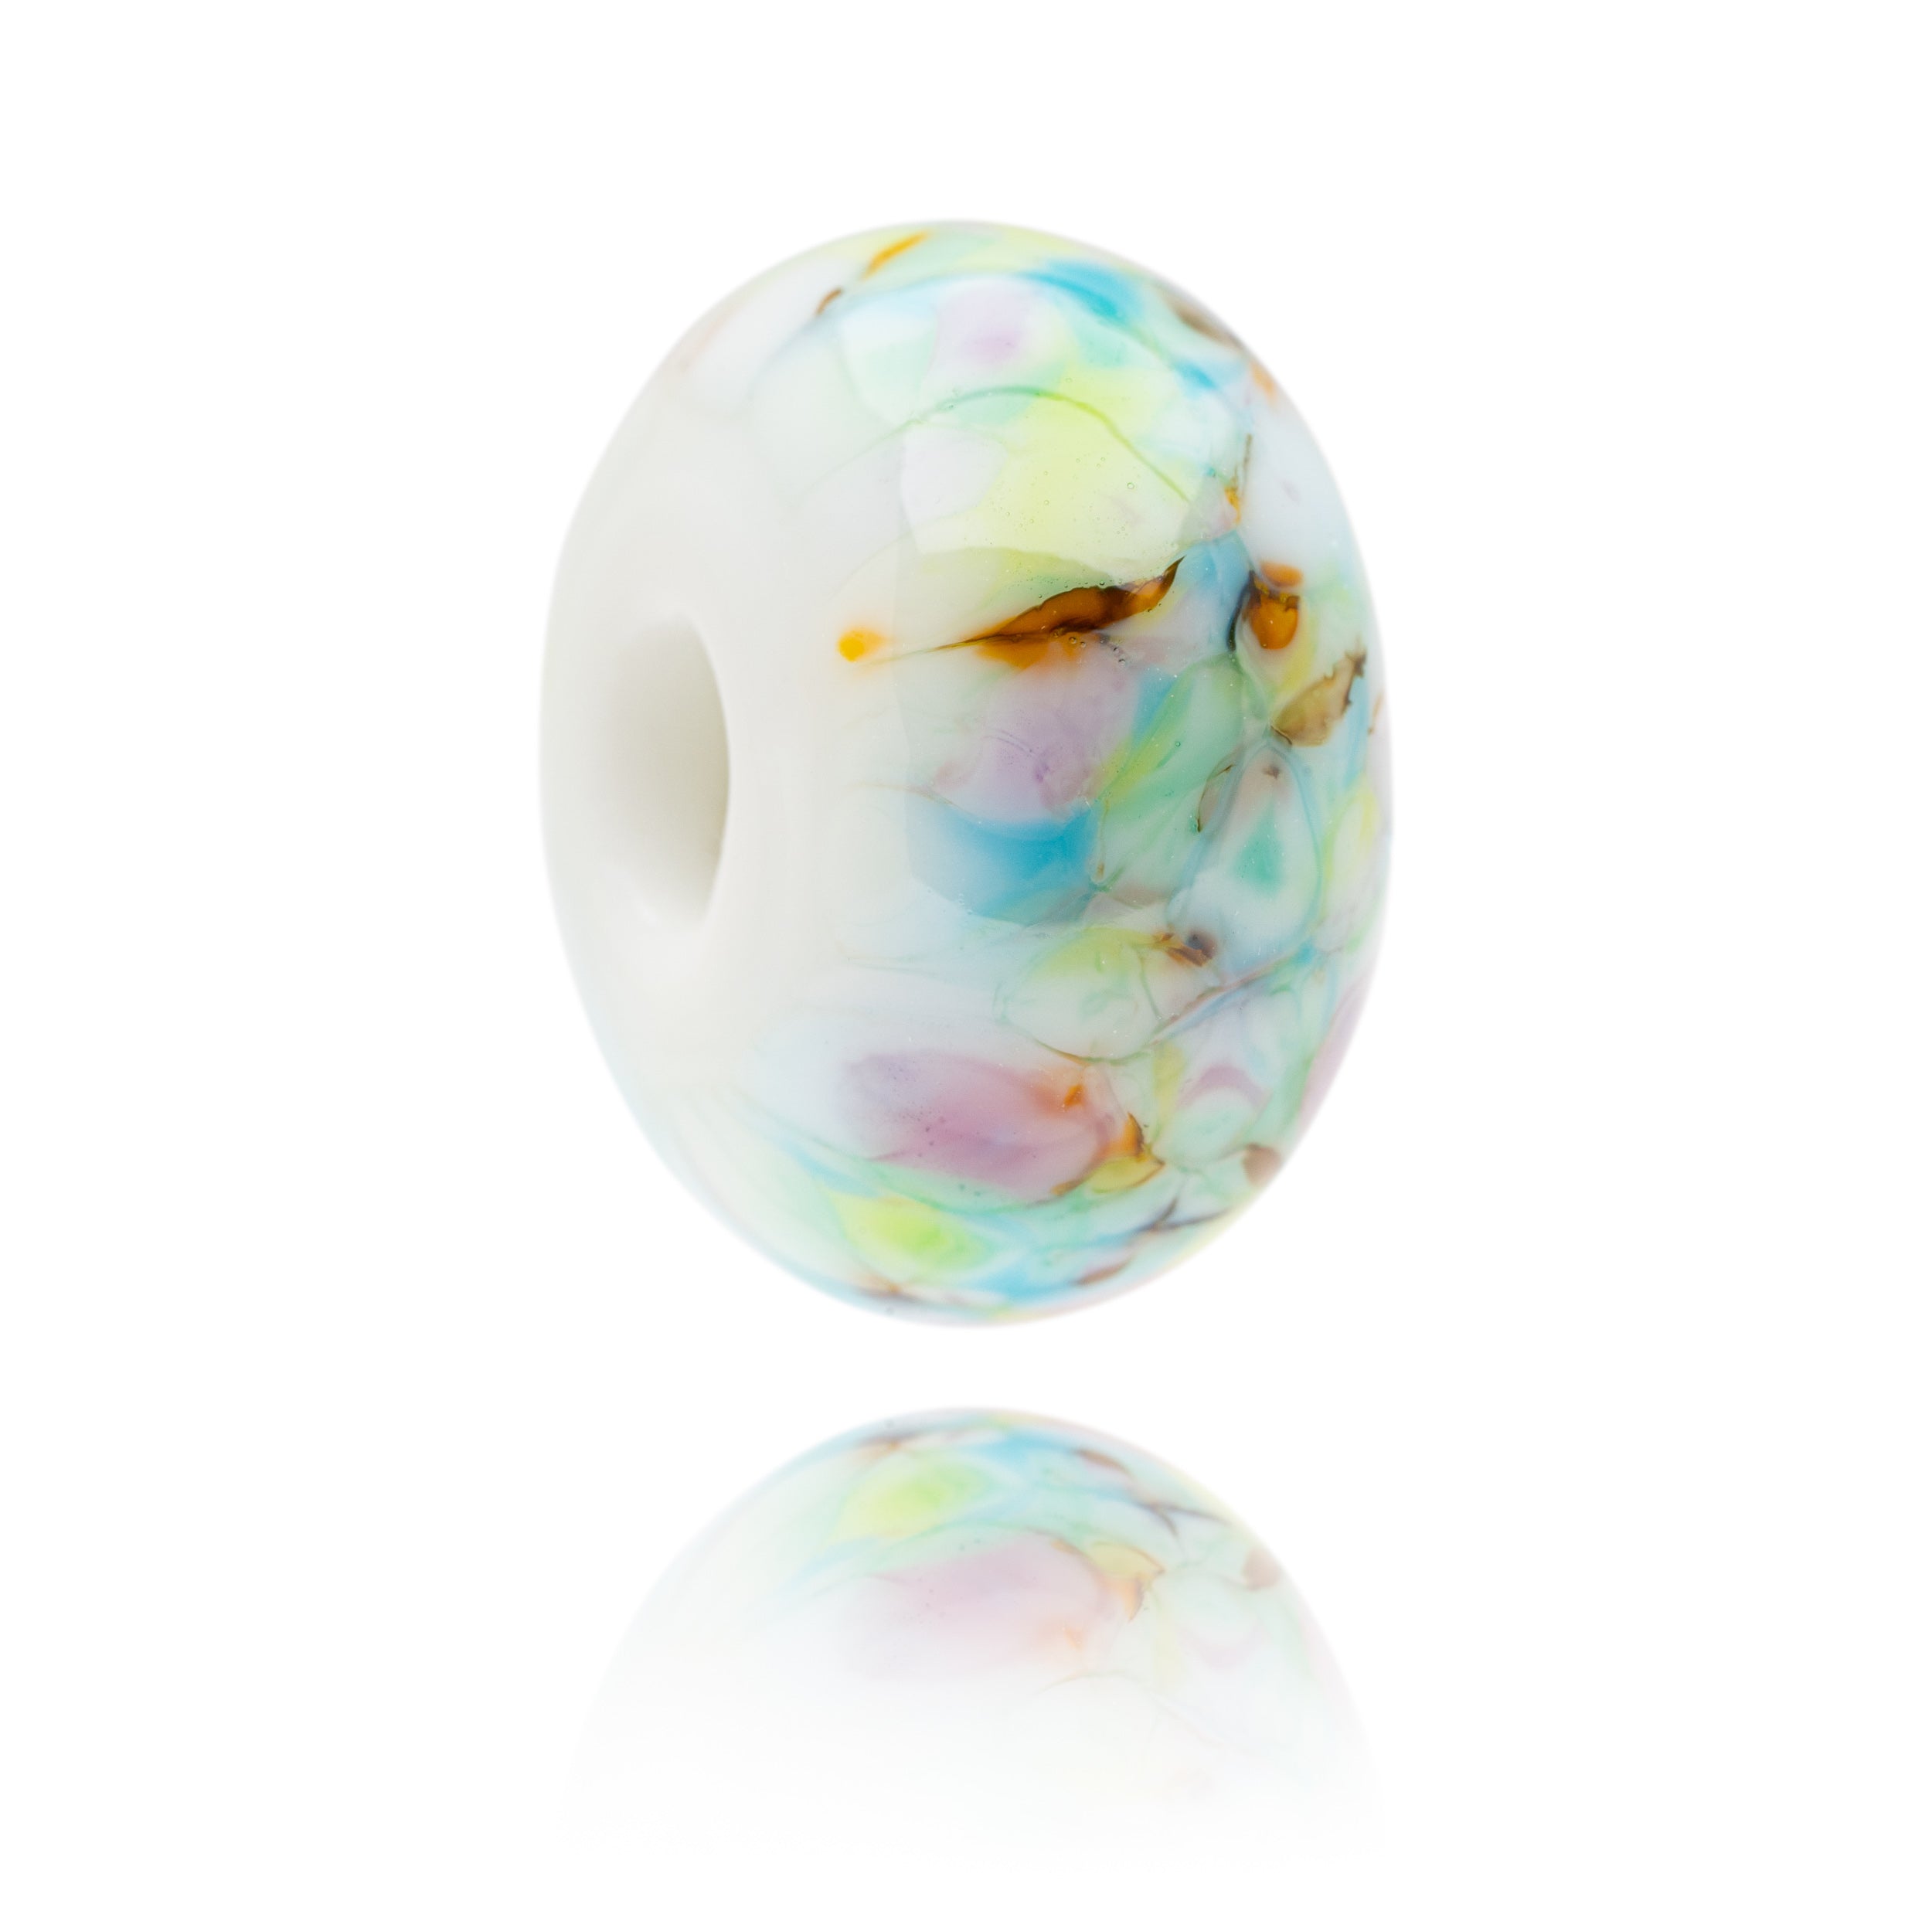 Colourful spring inspired glass bead.